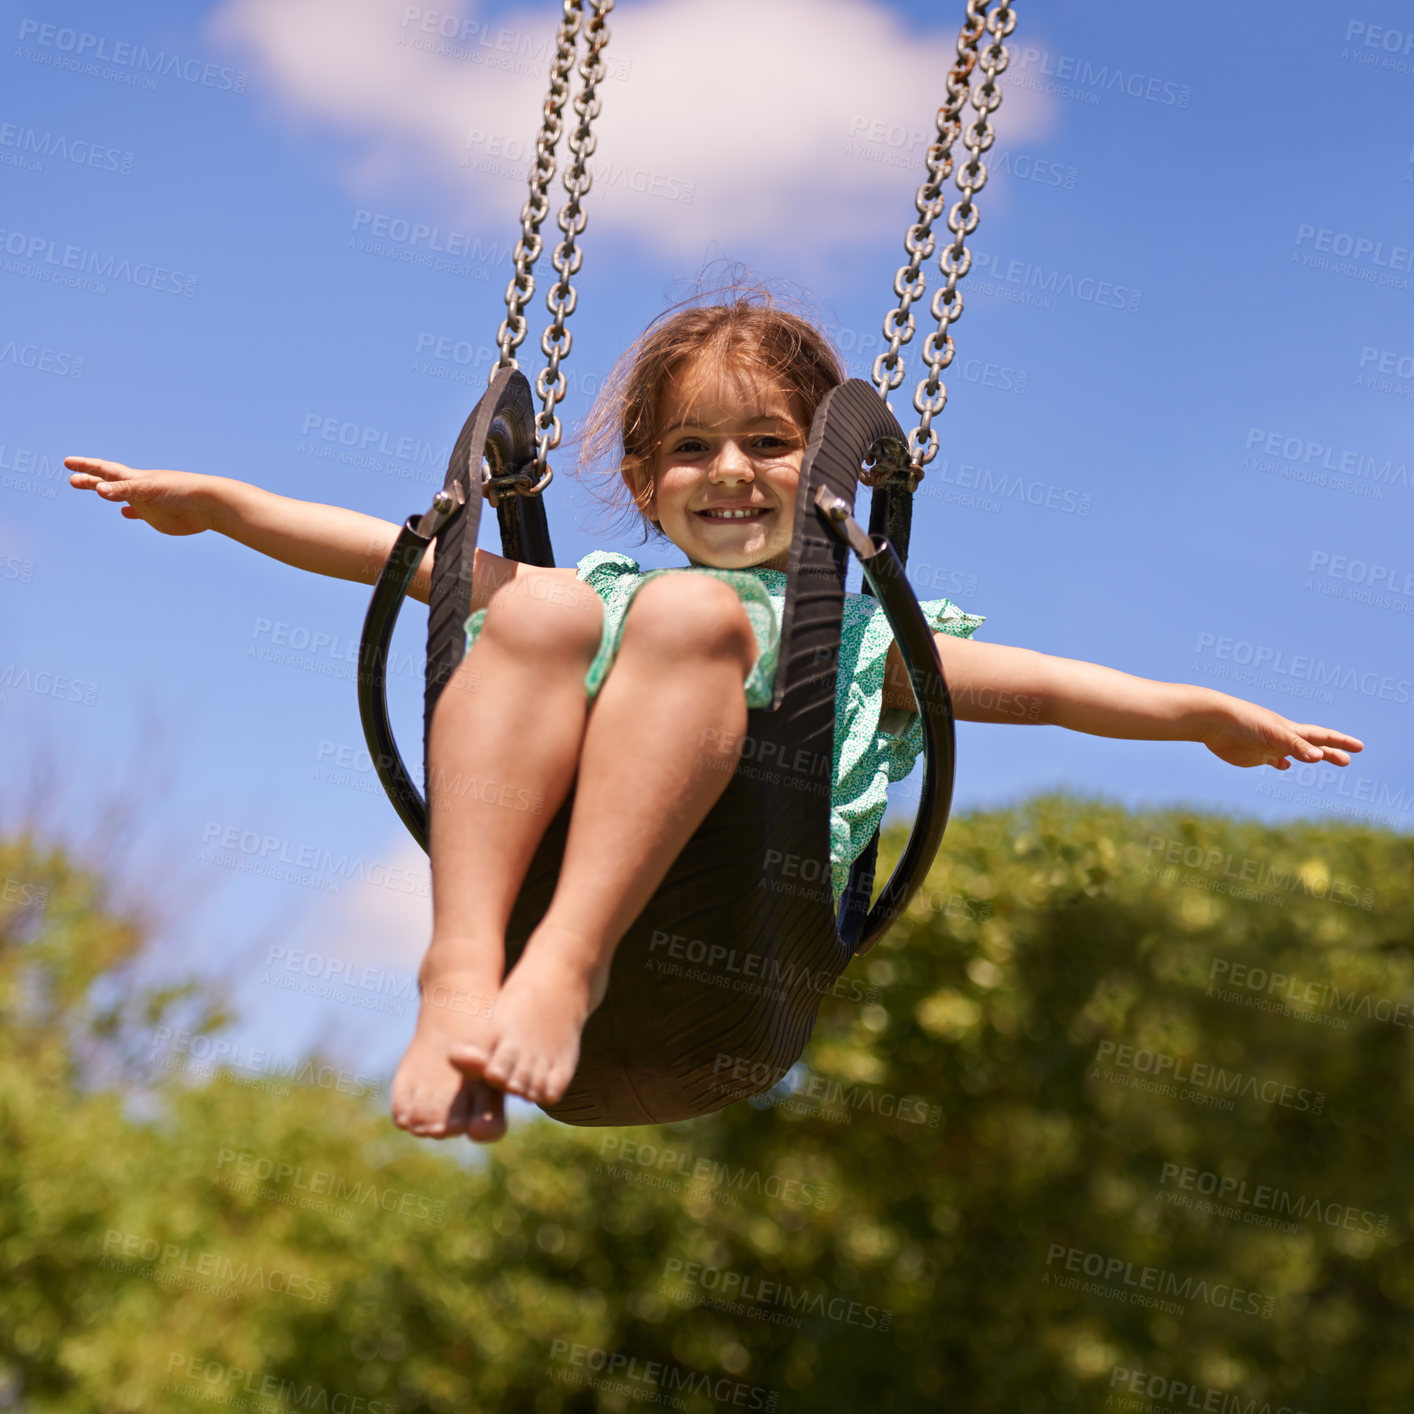 Buy stock photo Shot of a young girl playing on a swing outsdie